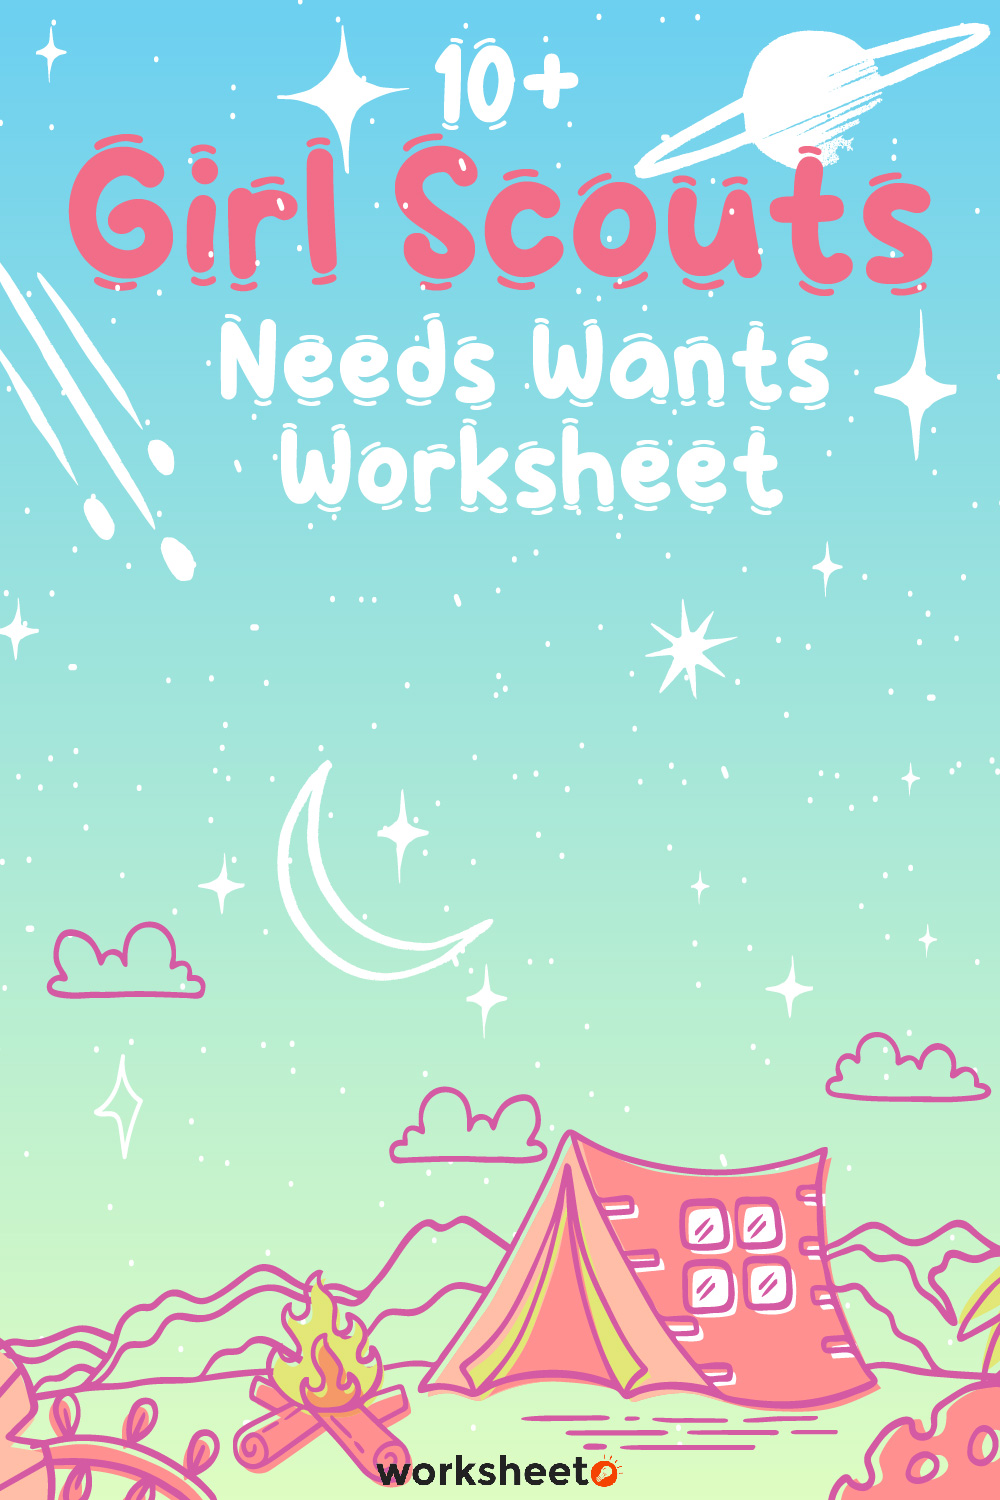 19 Images of Girl Scouts Needs Wants Worksheet